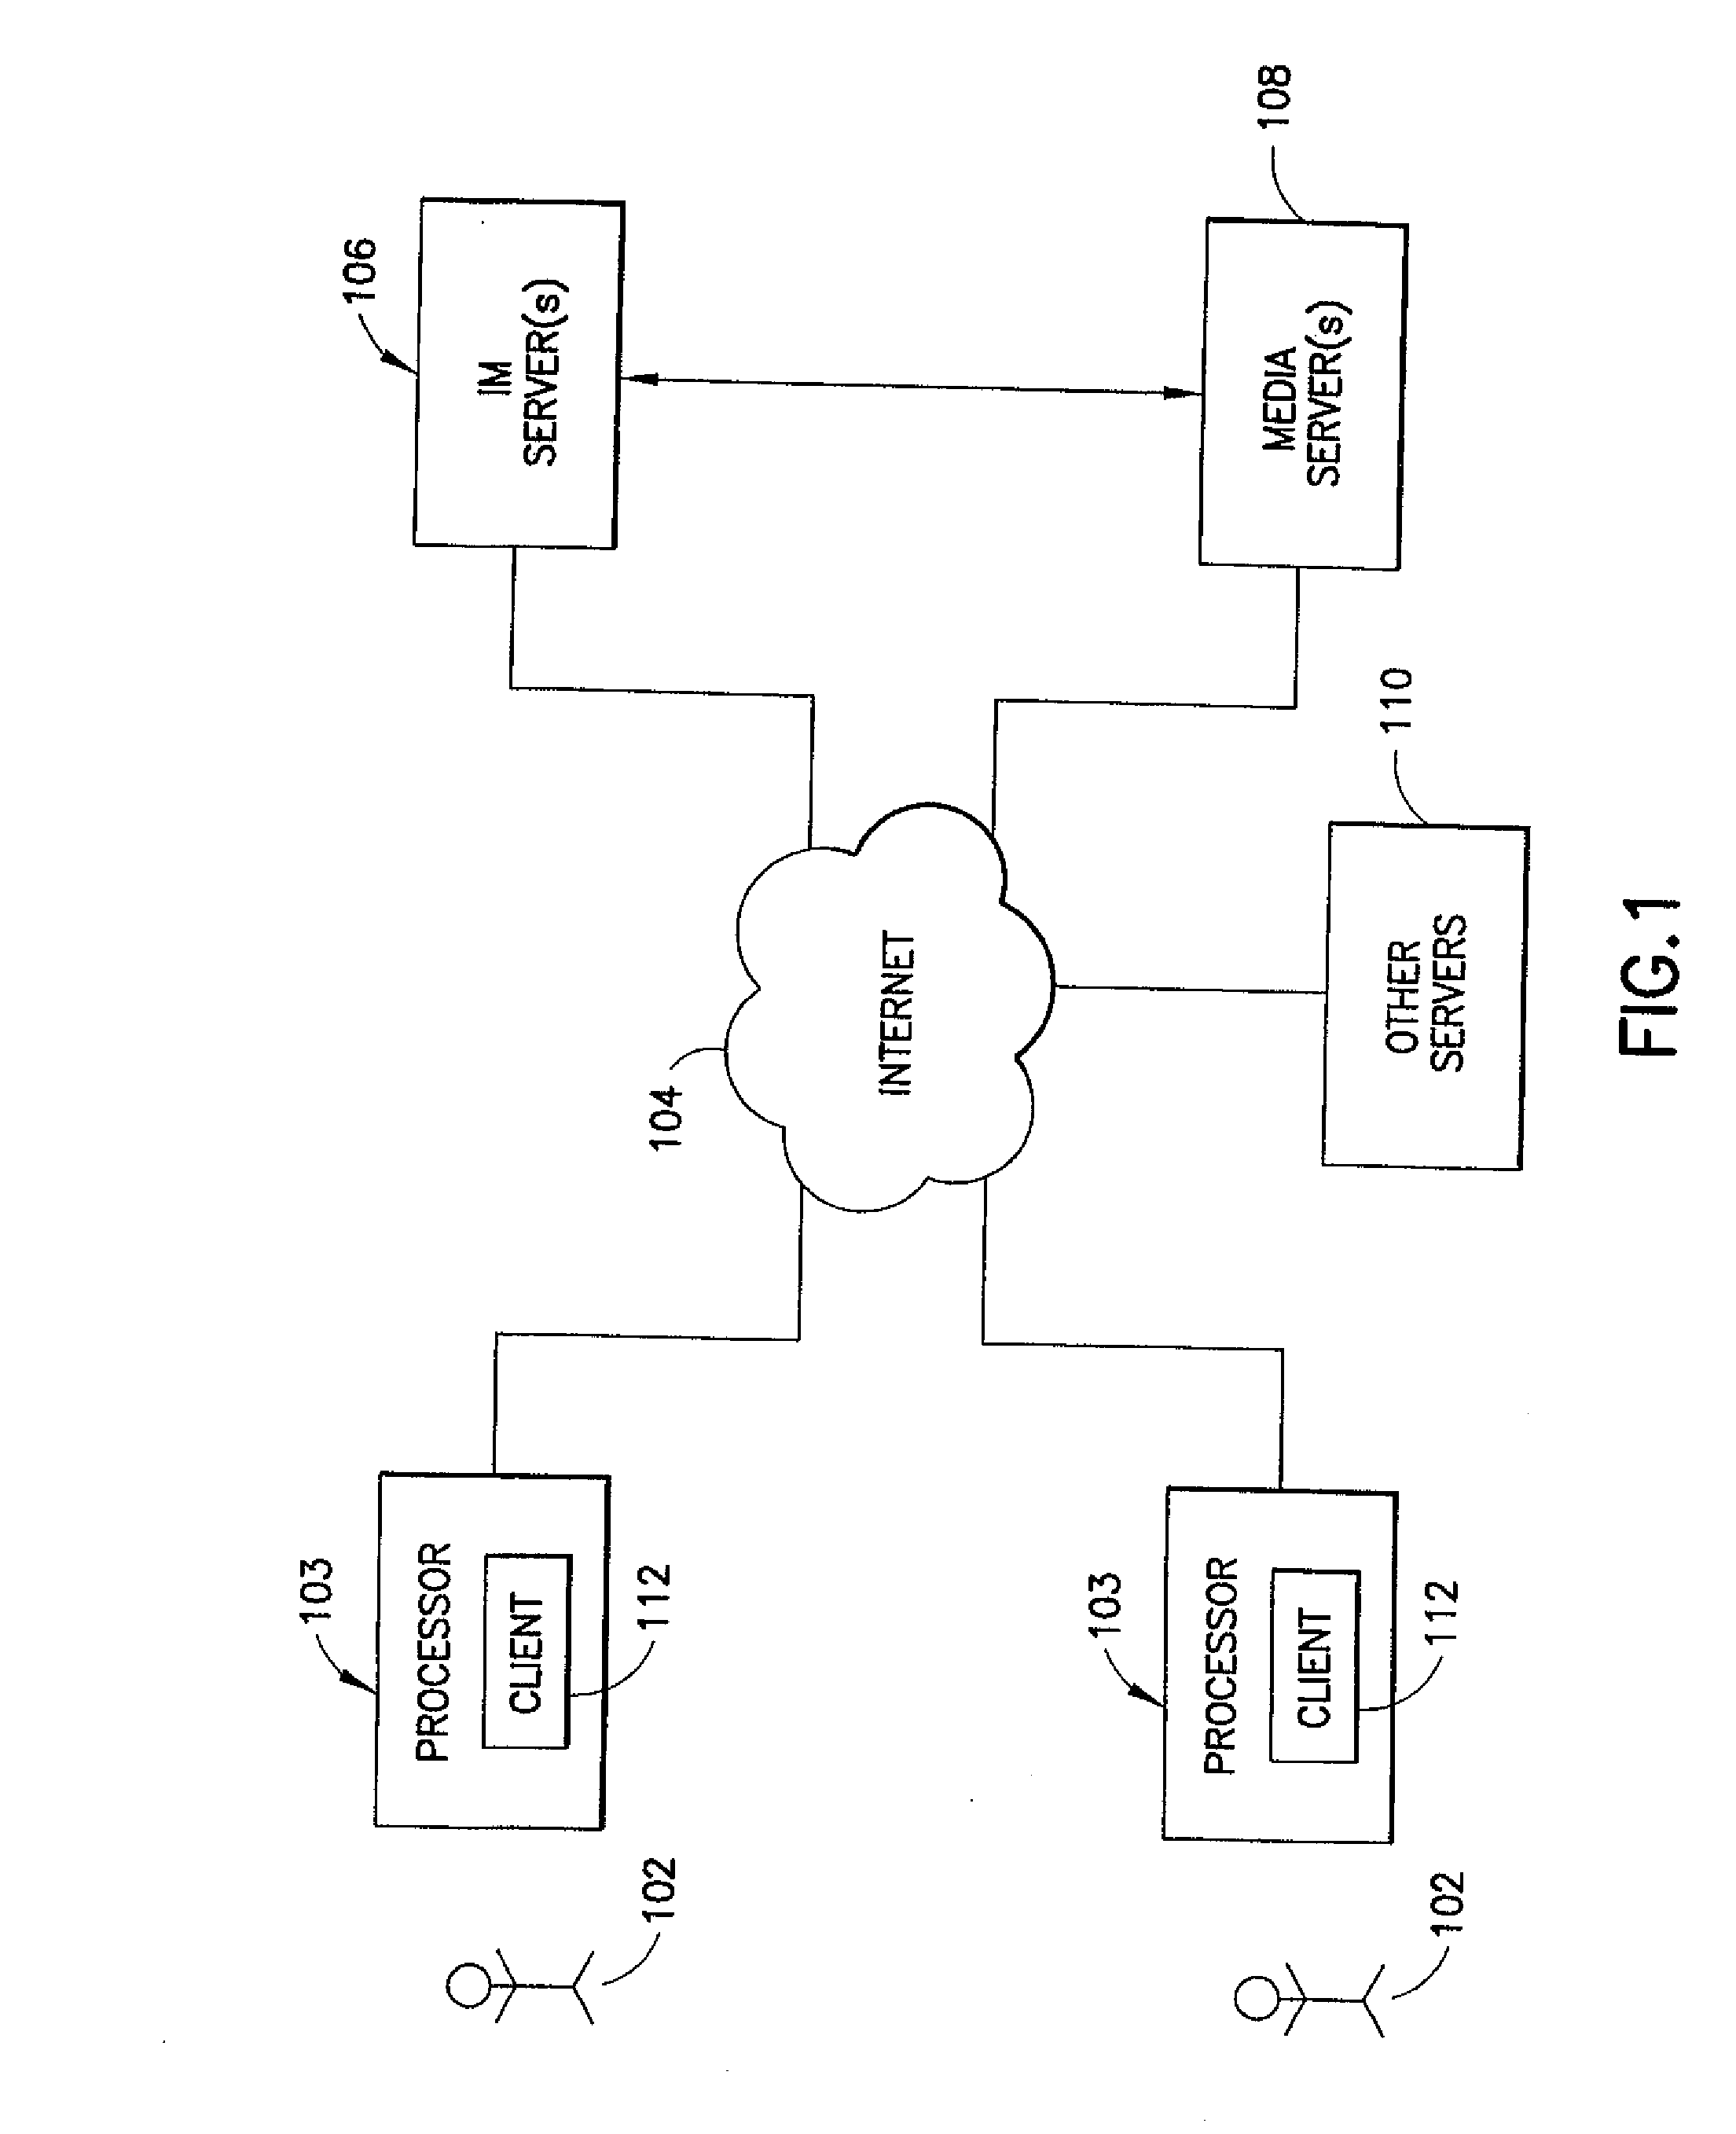 System and method for enhanced messaging